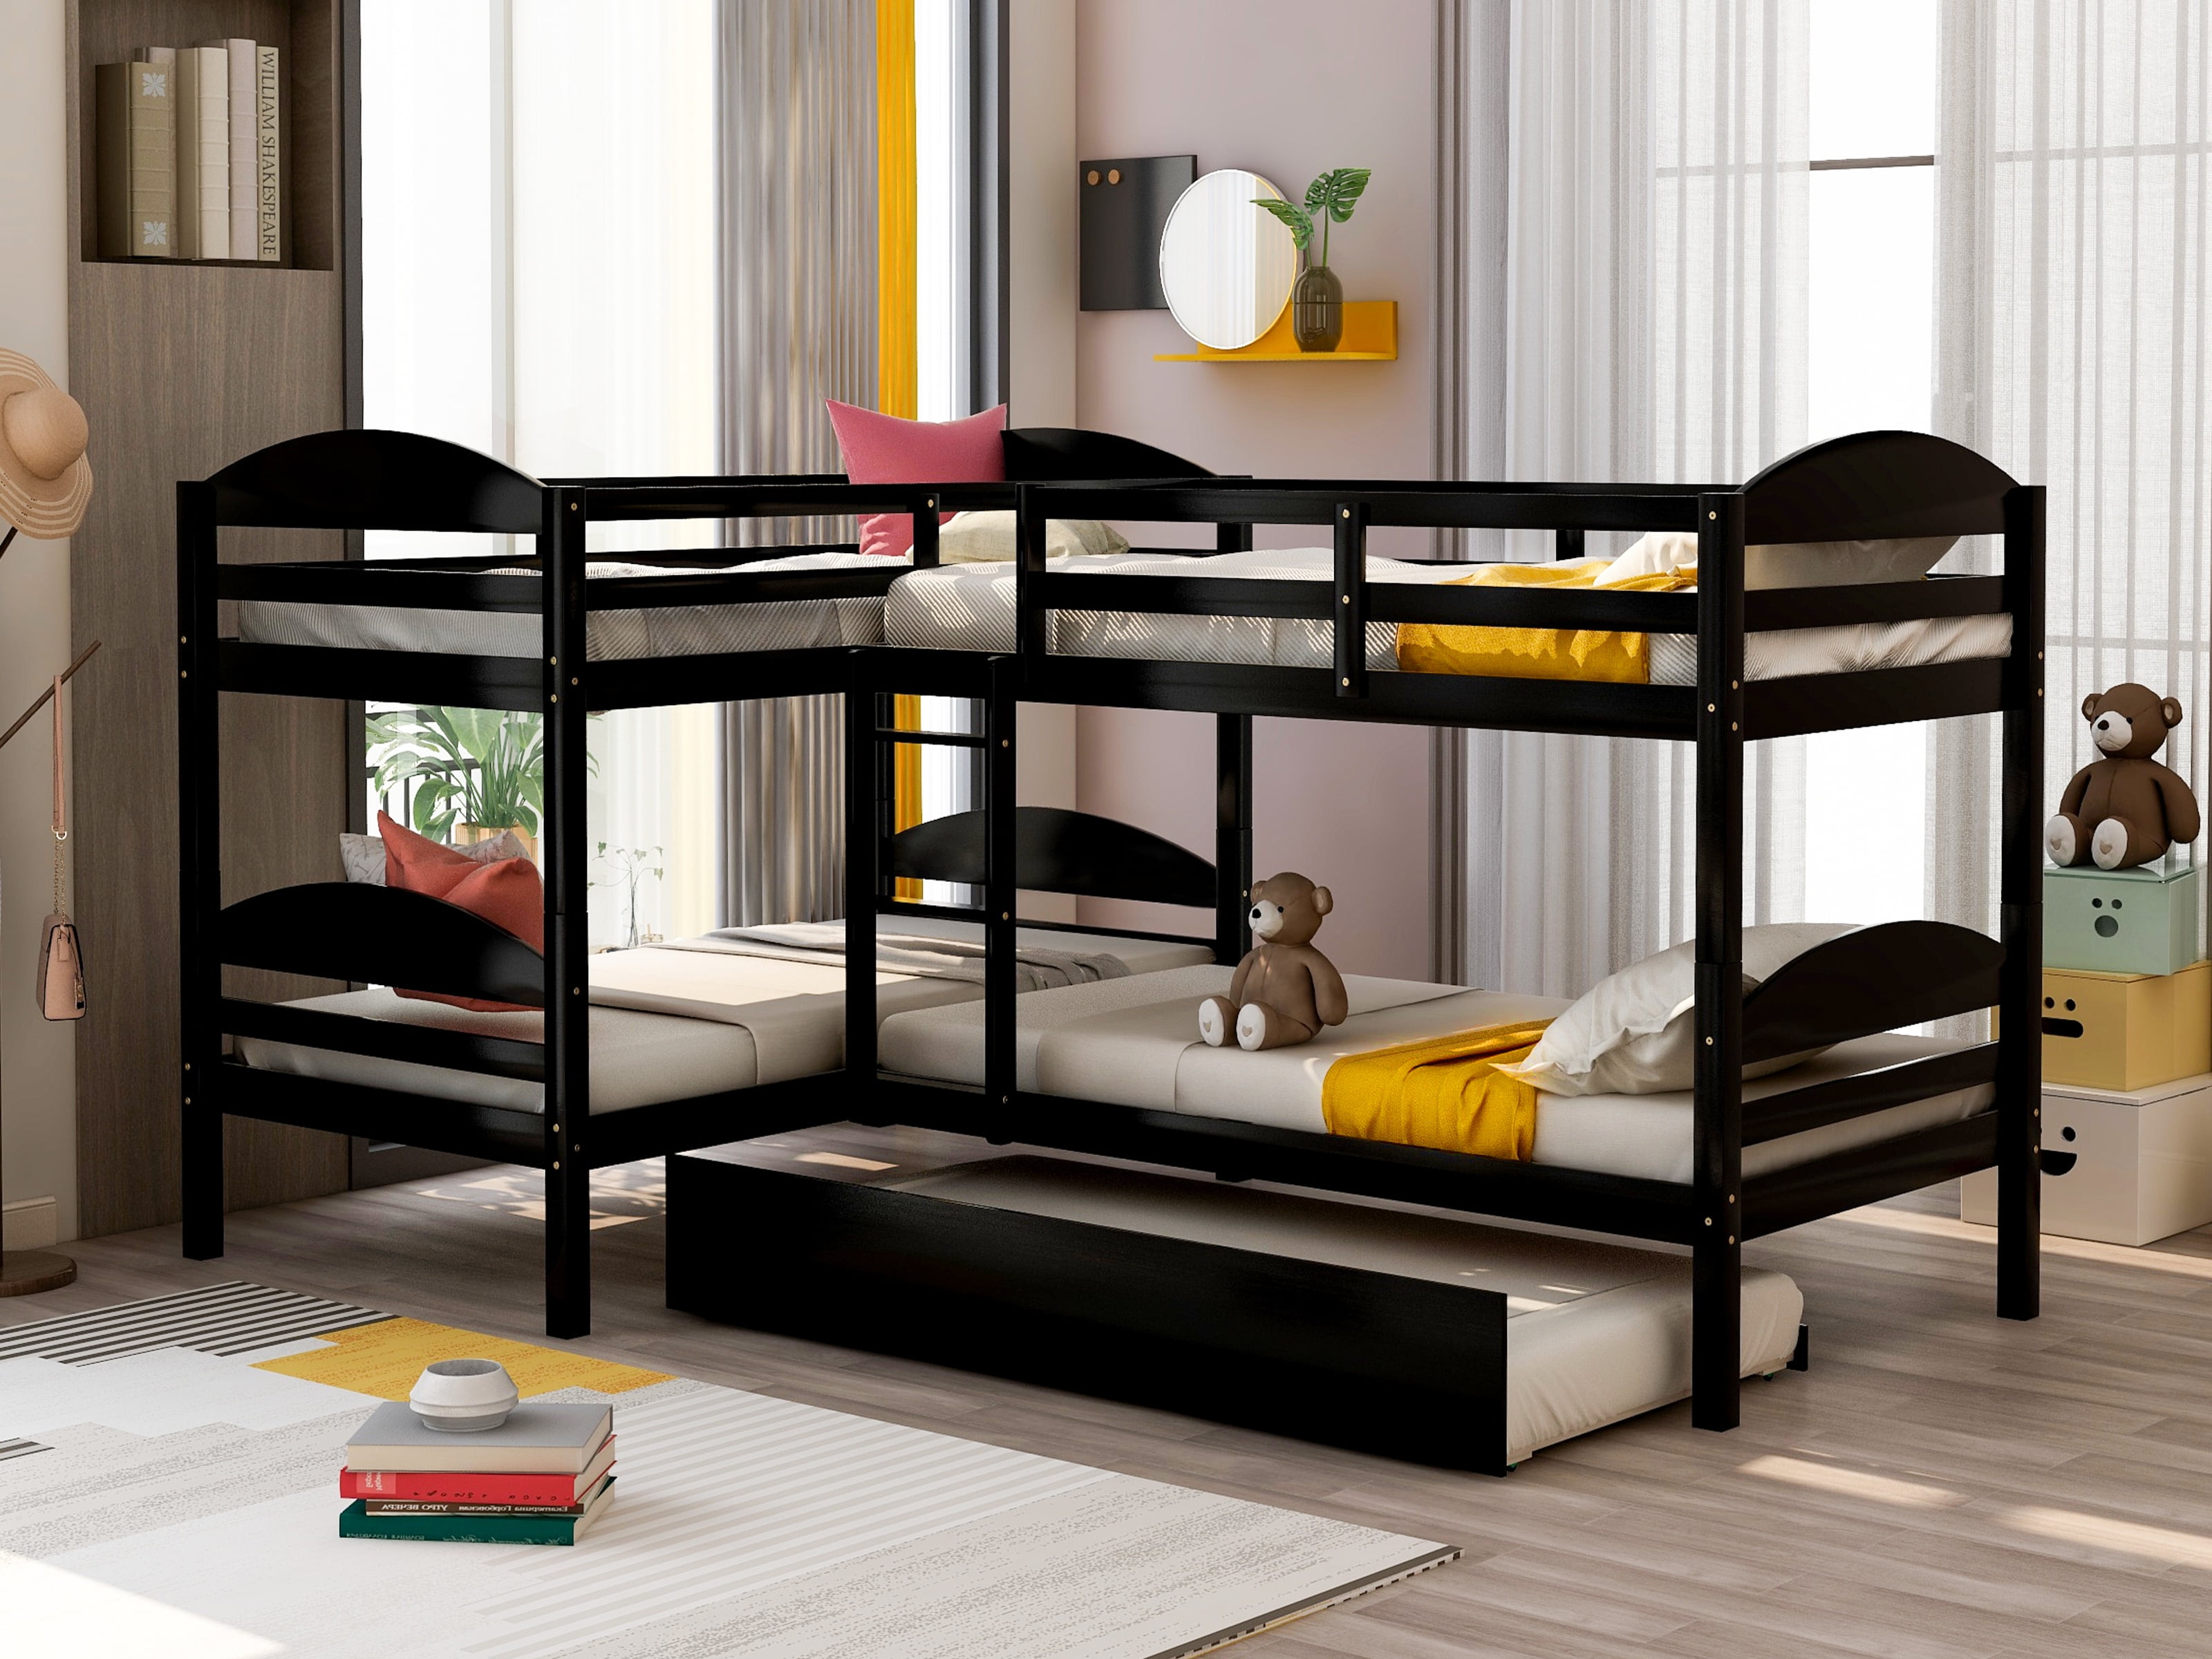 Bed Bunk For Kids Boys Girls Teens, Corner Twin Beds With Trundle